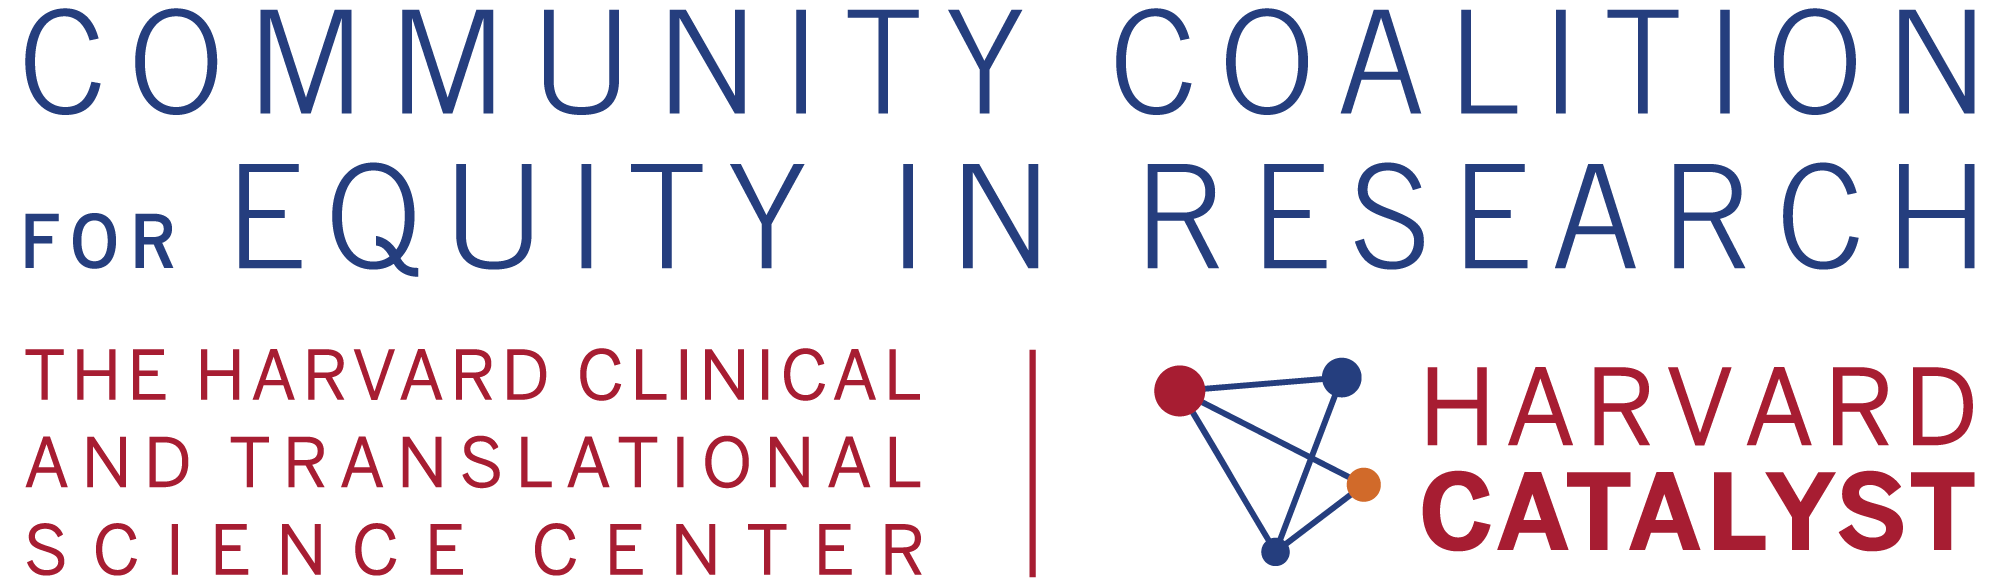 Community Coalition for Equity in Research